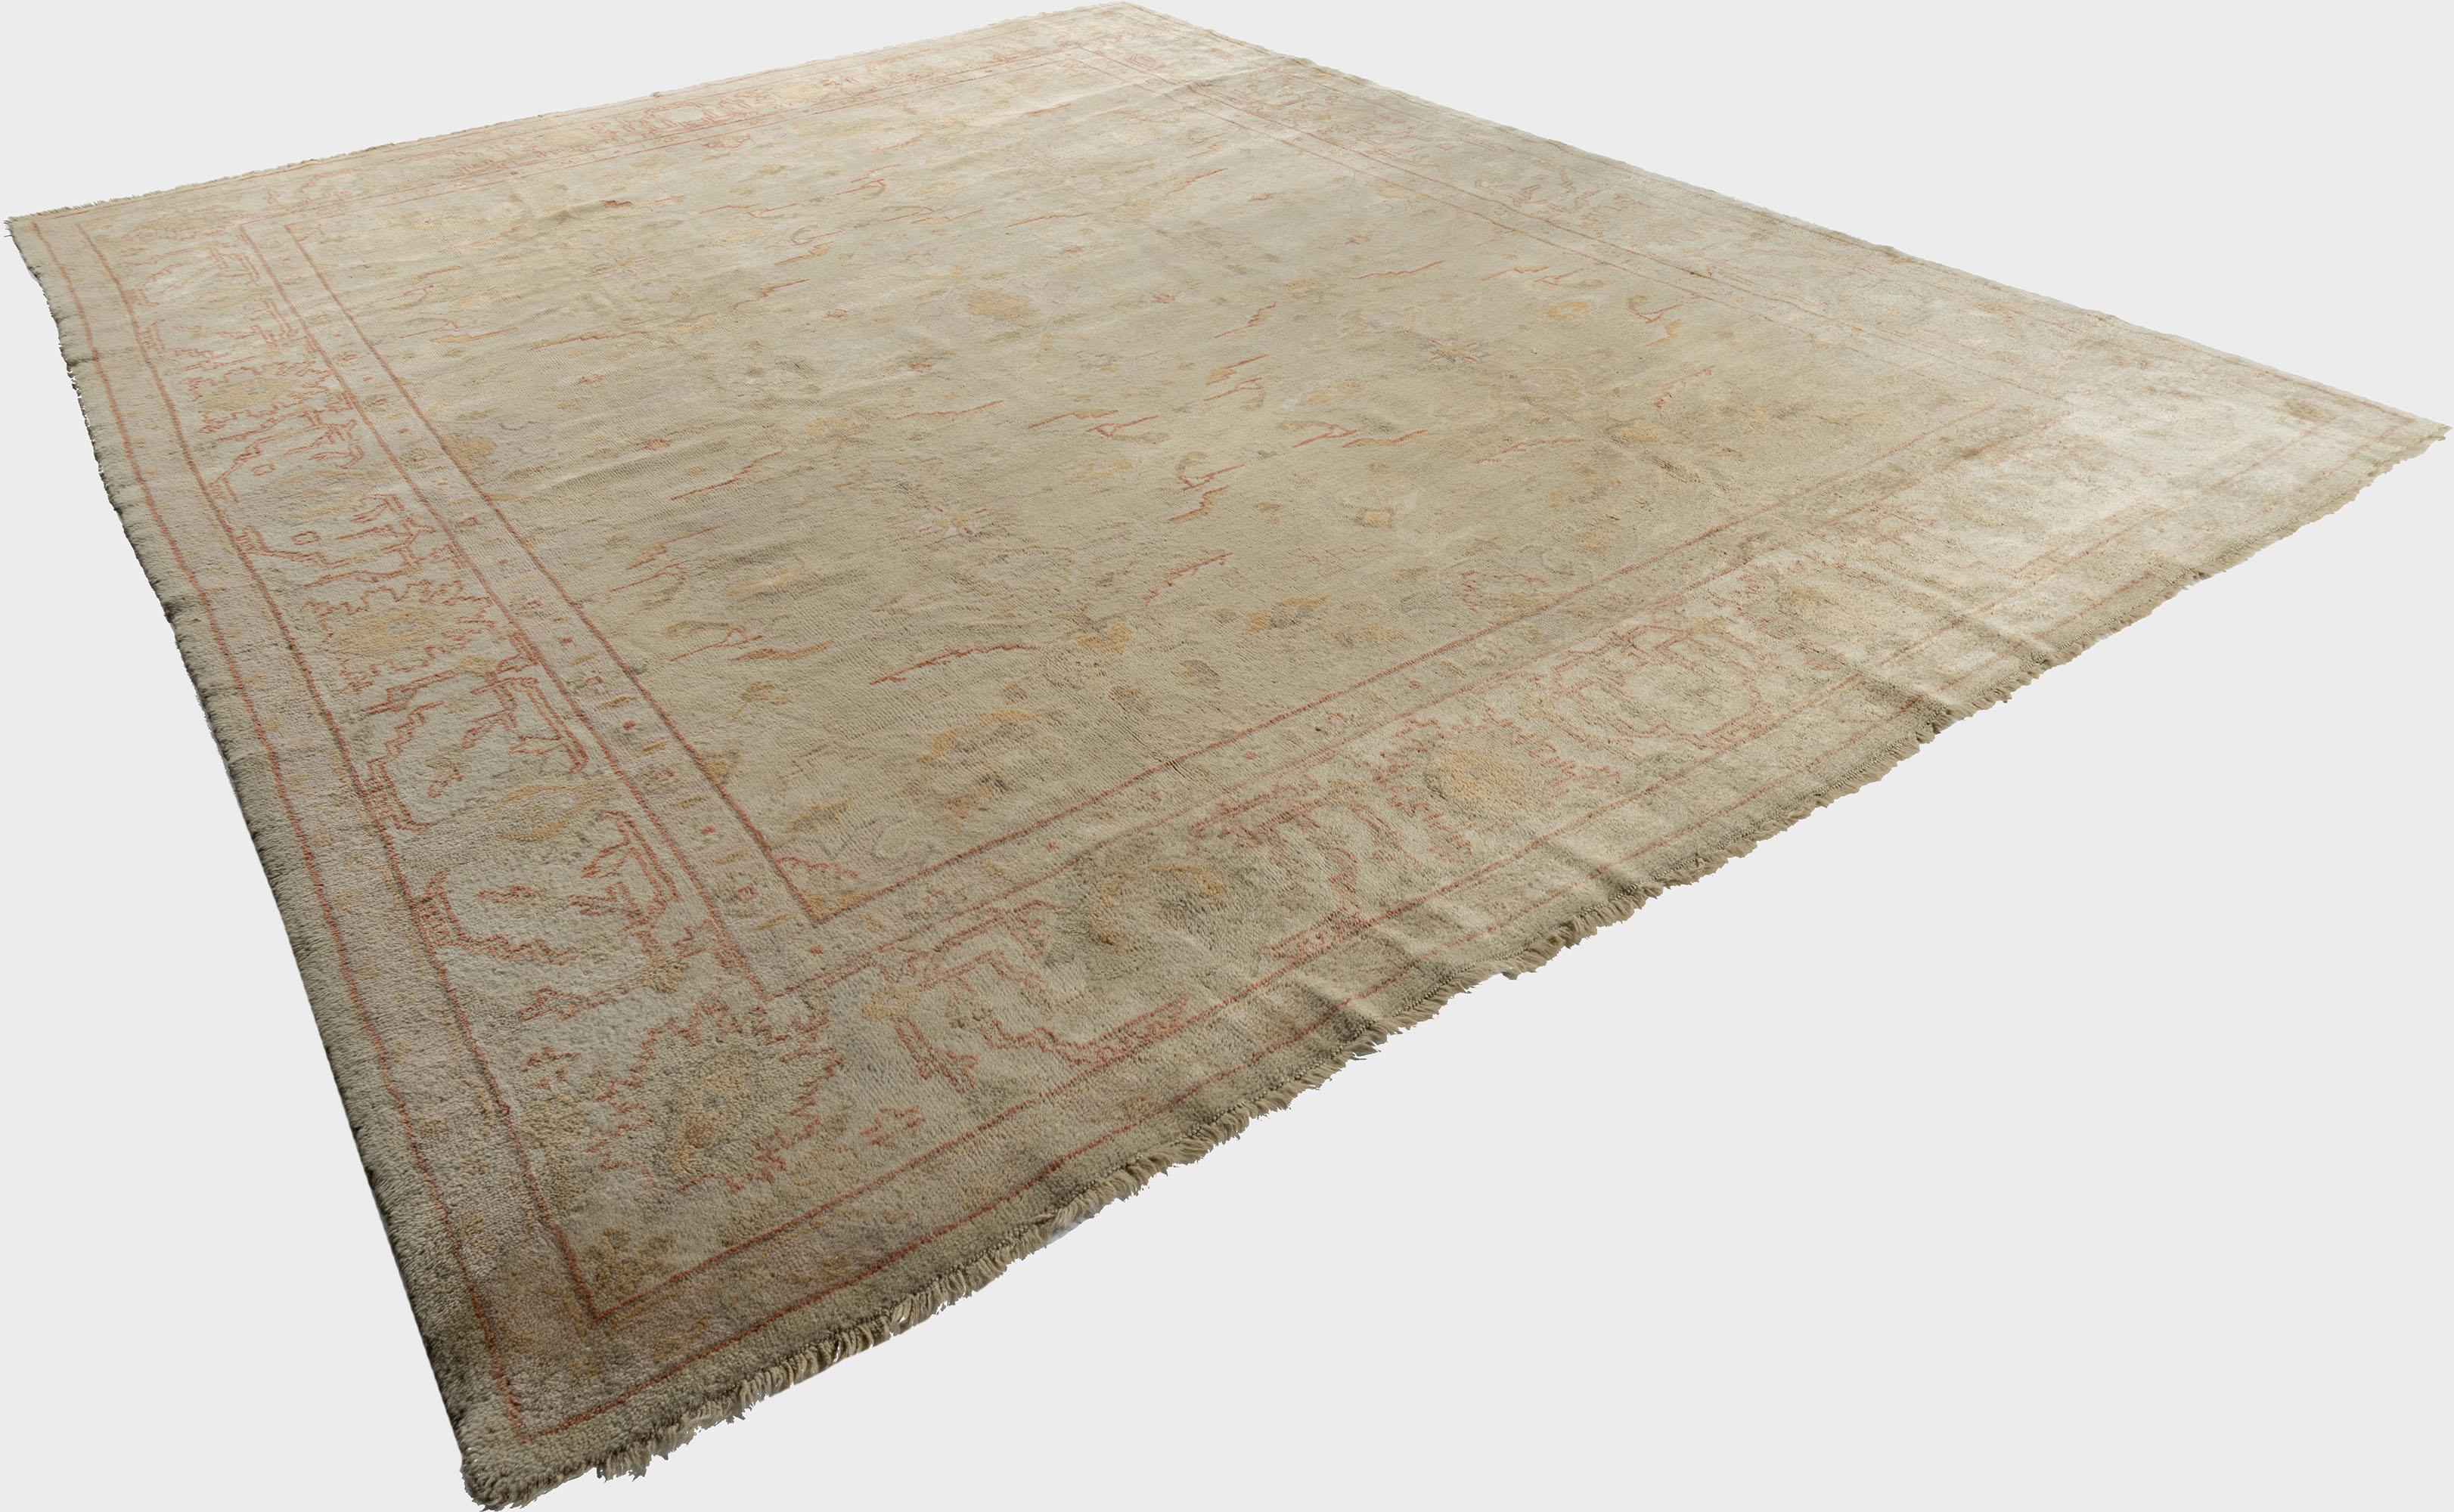 Vintage Turkish Oushak Rug 10' x 13' In Good Condition For Sale In New York, NY